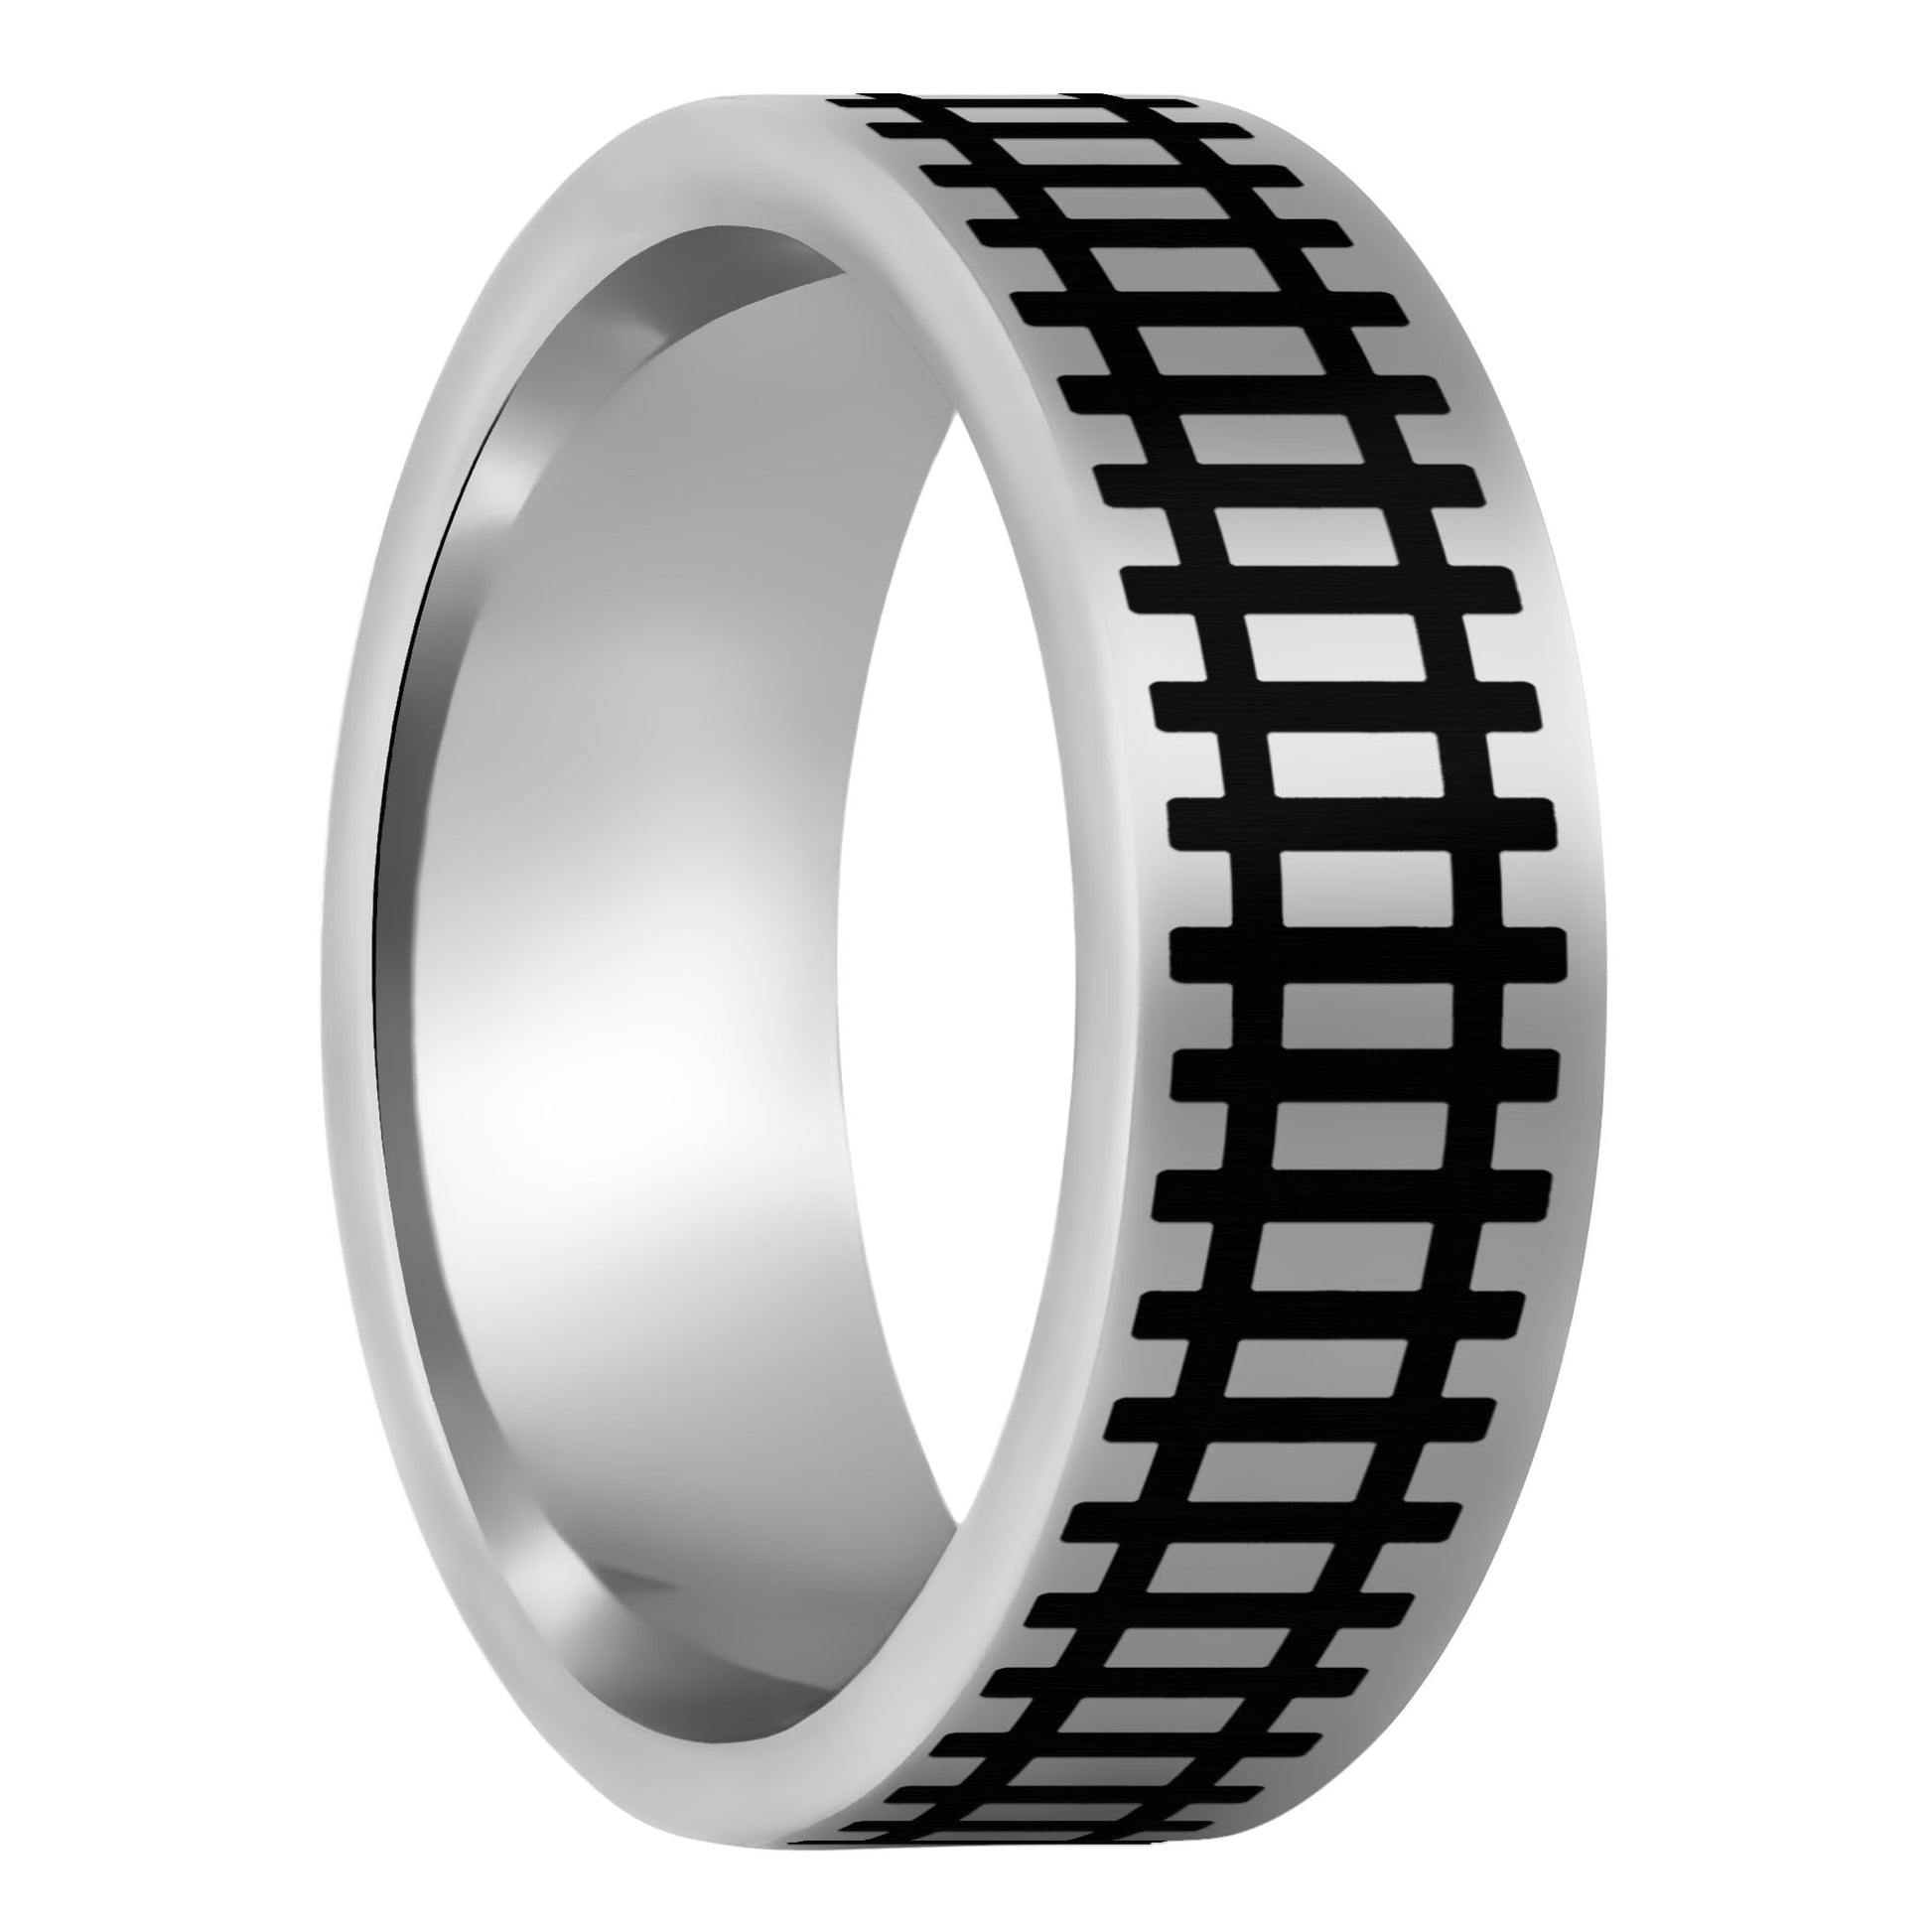 One Railroad Tracks Tungsten Men's Wedding Band displayed on a plain white background